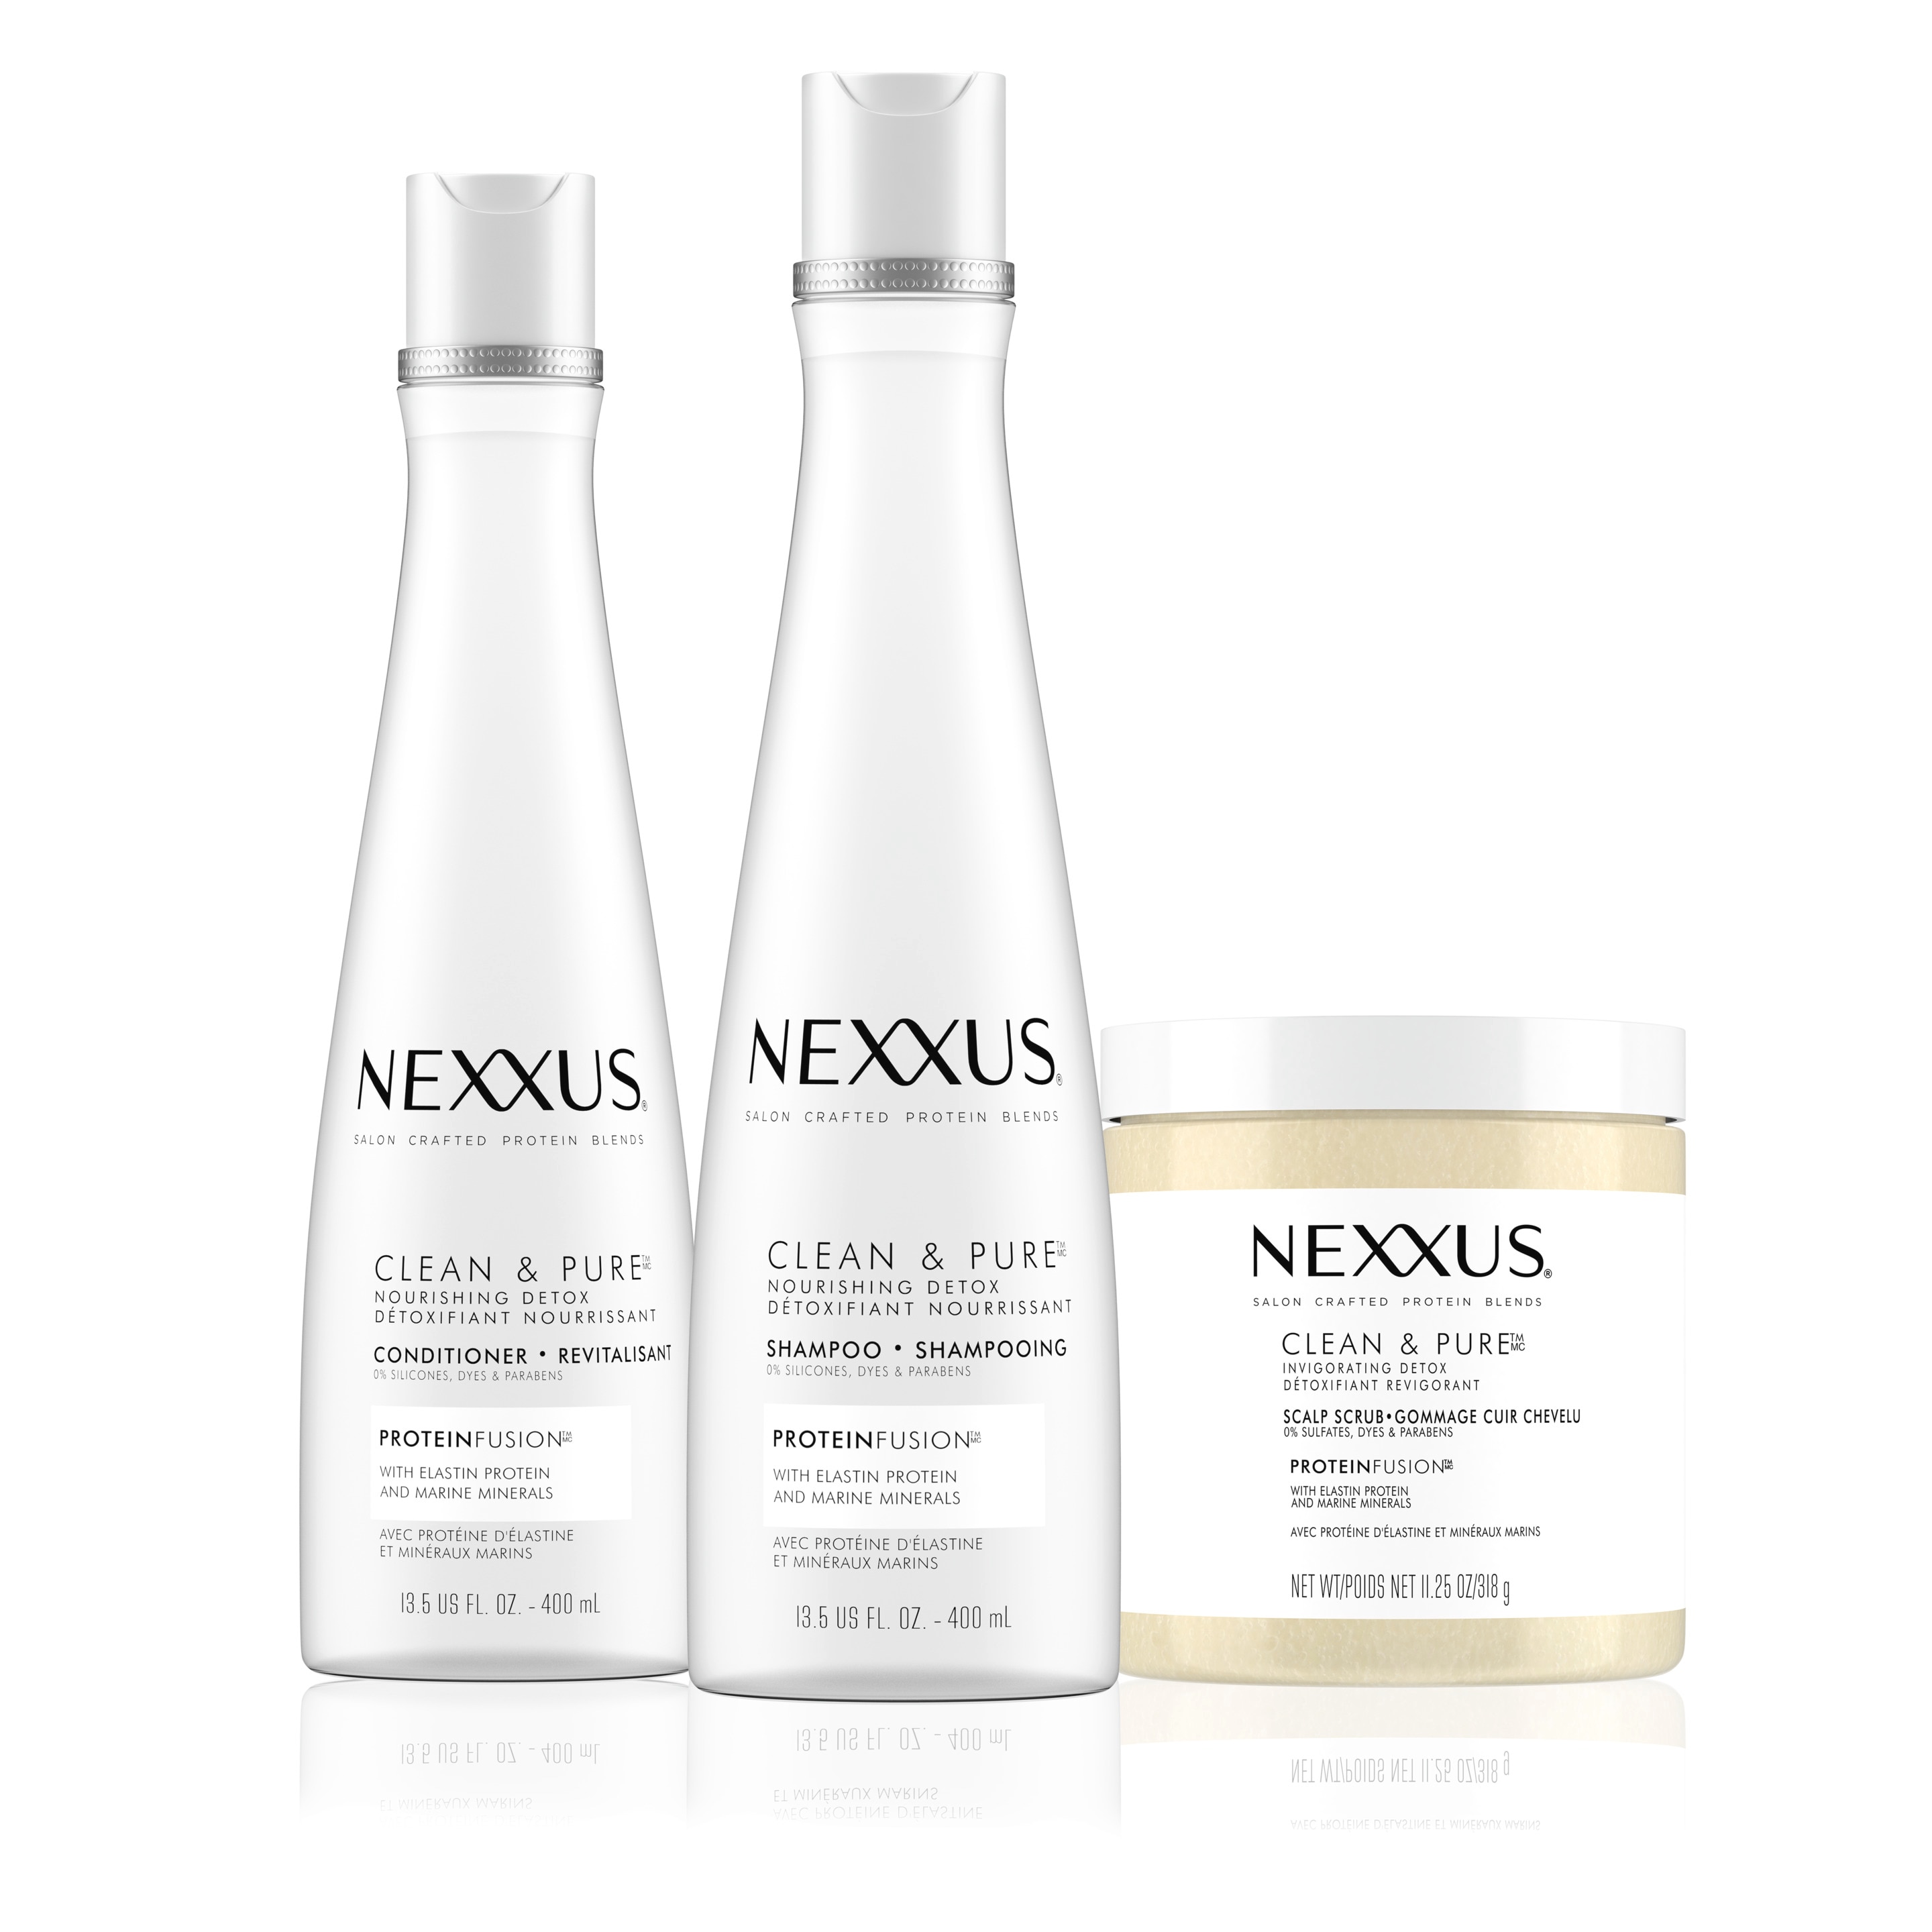 Nexxus Clean & Pure hair care collection Text